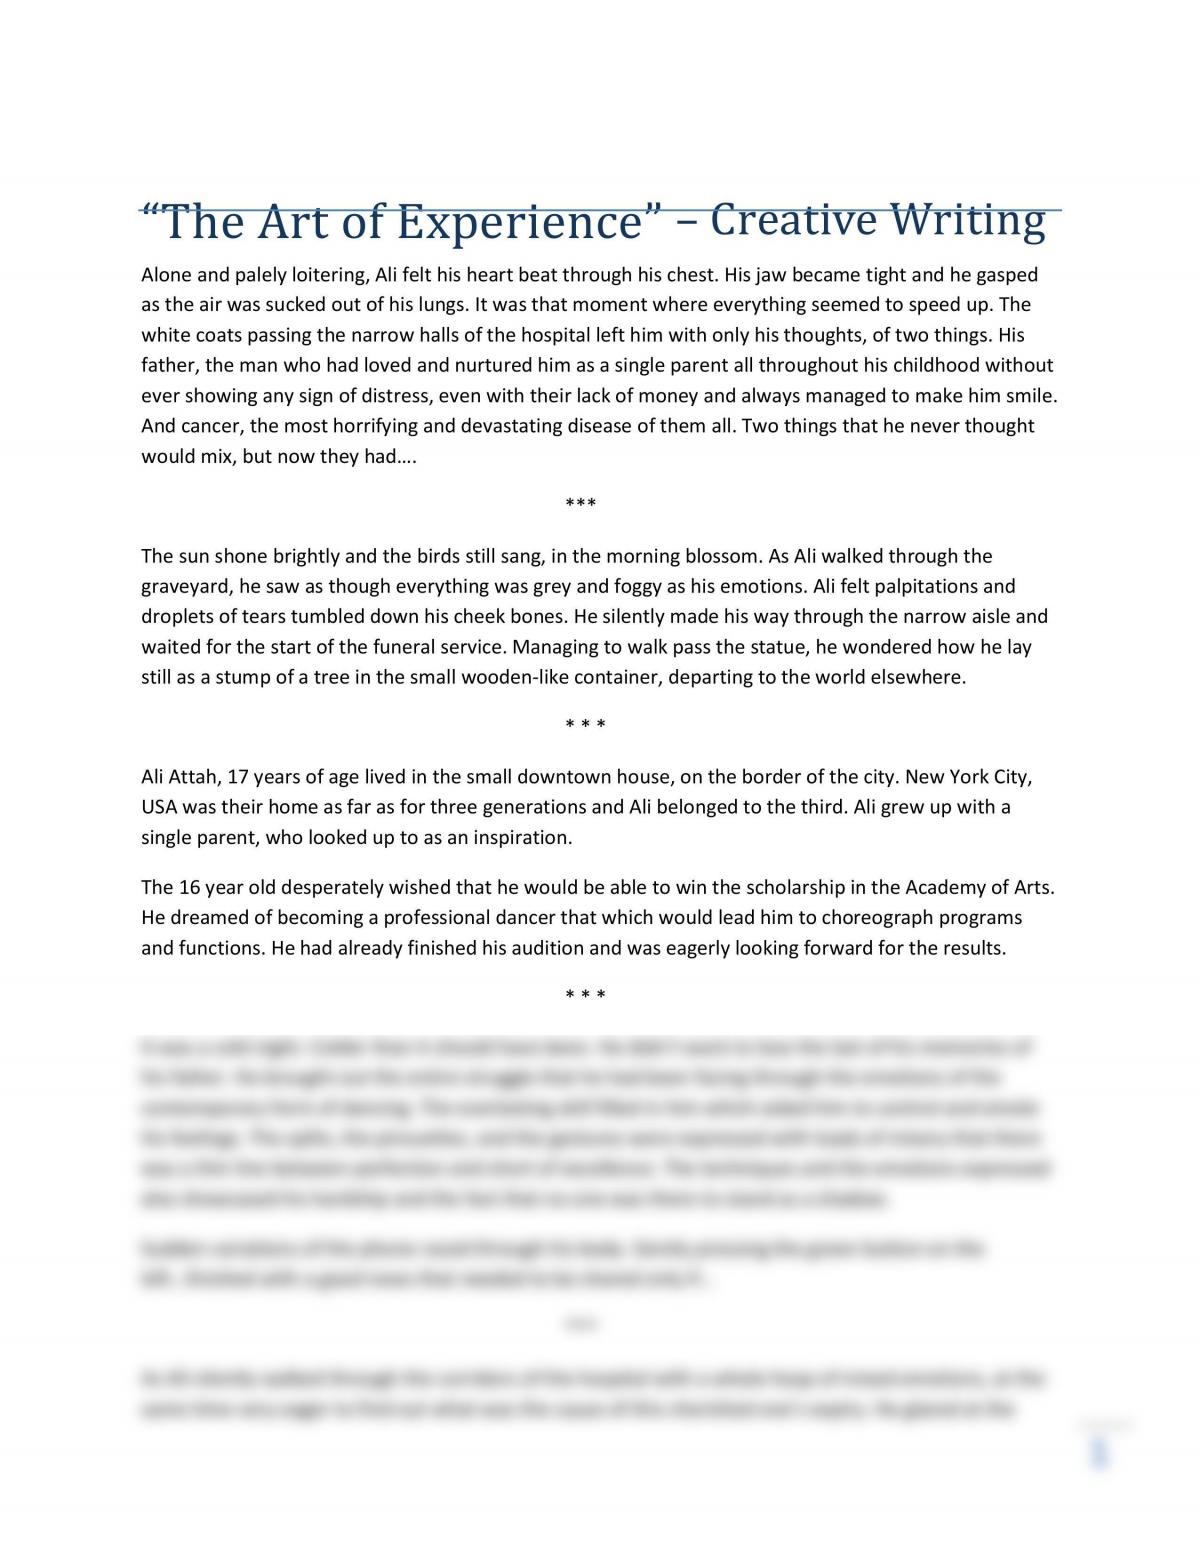 write an essay sharing your experience with art